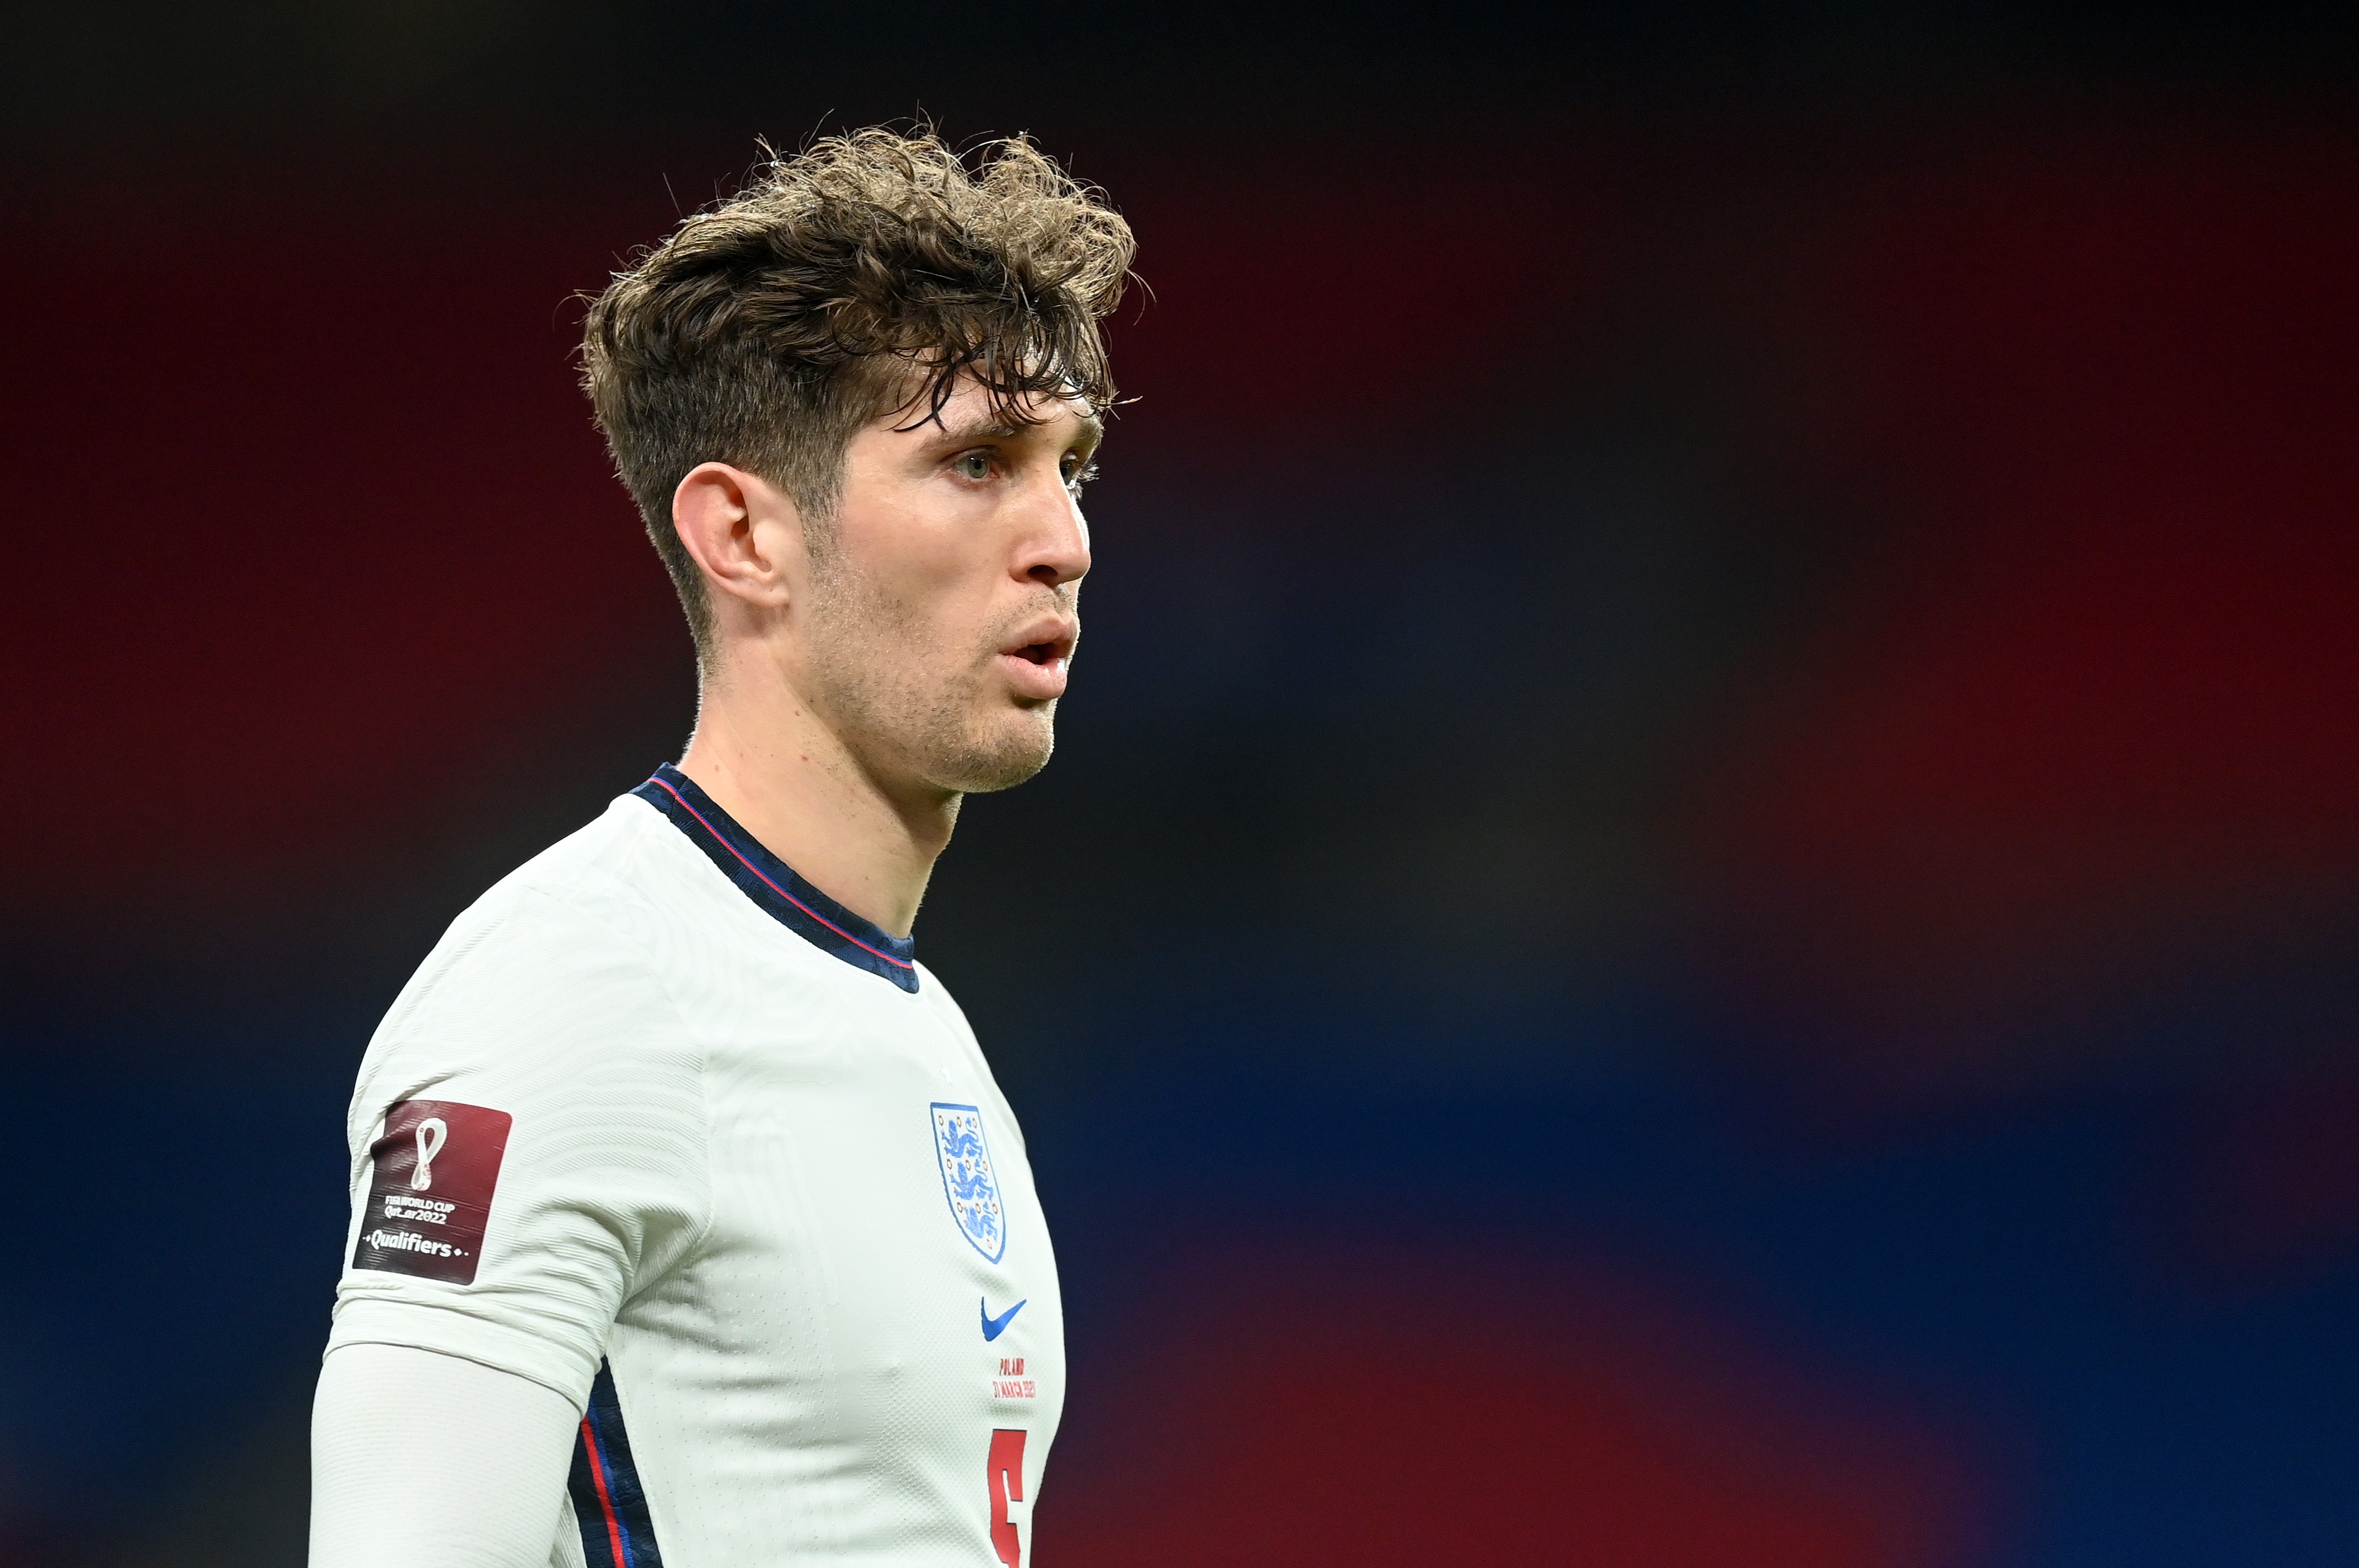 Stones did well to recover from his mistake, Southgate said